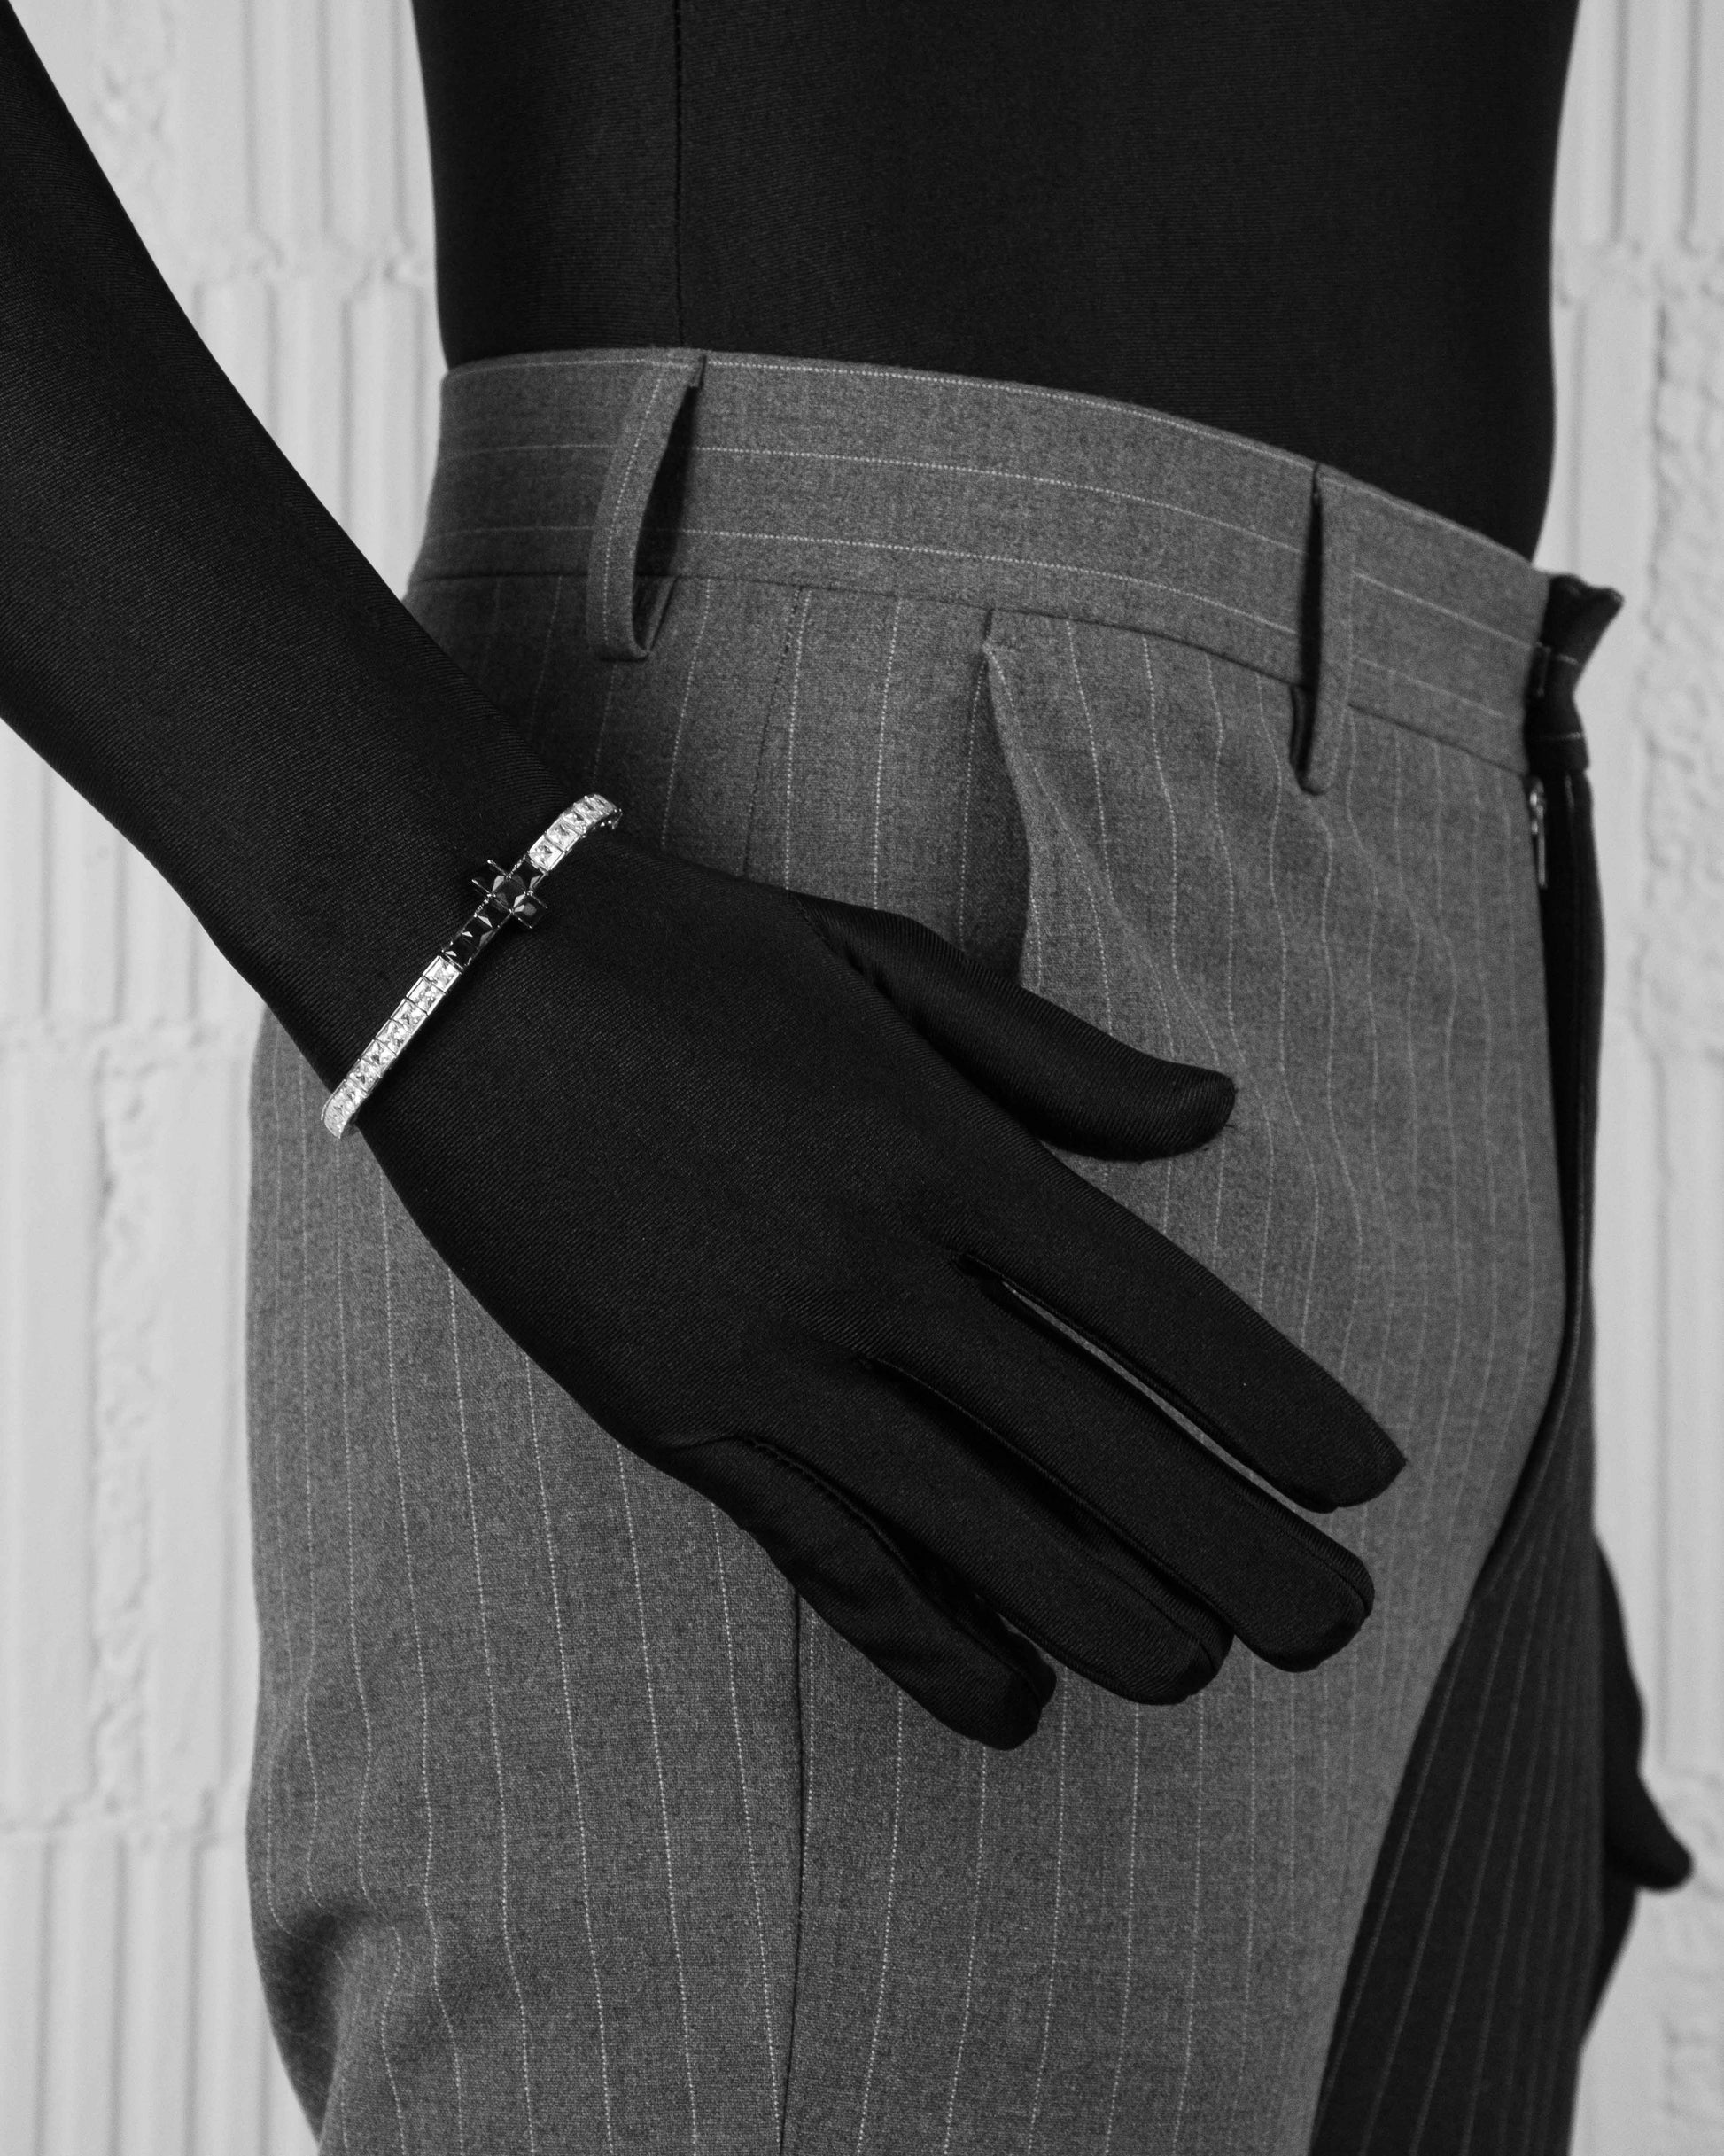 man with black suit wearing white tennis chain bracelet with black cross element and hand-set princess-cut stones in white and black